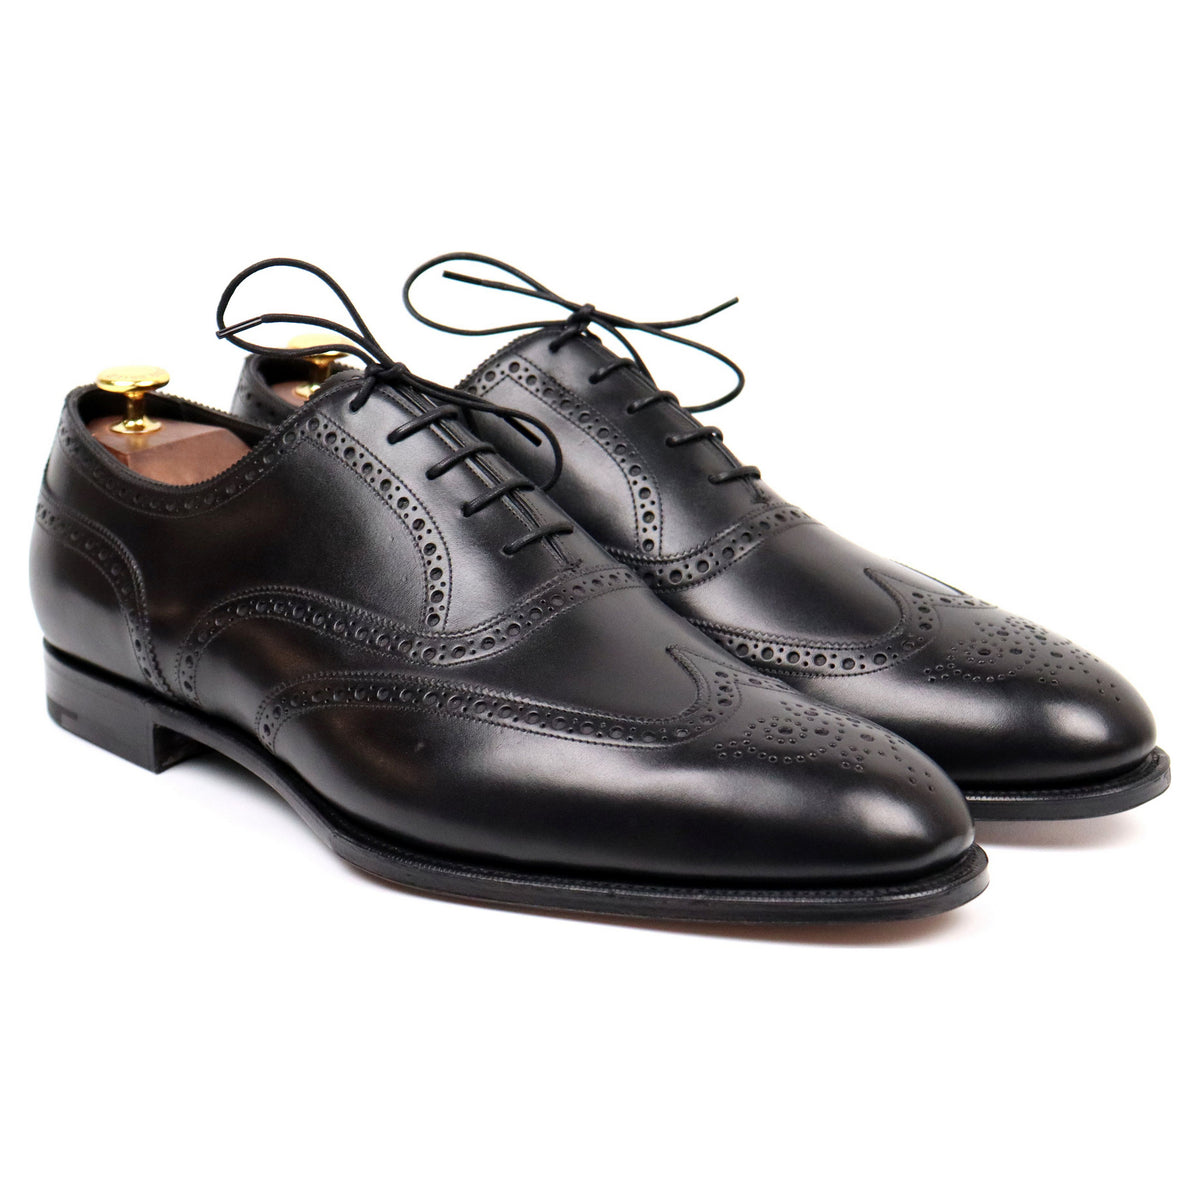 Malvern' Black Leather Brogues UK 12.5 E - Abbot's Shoes